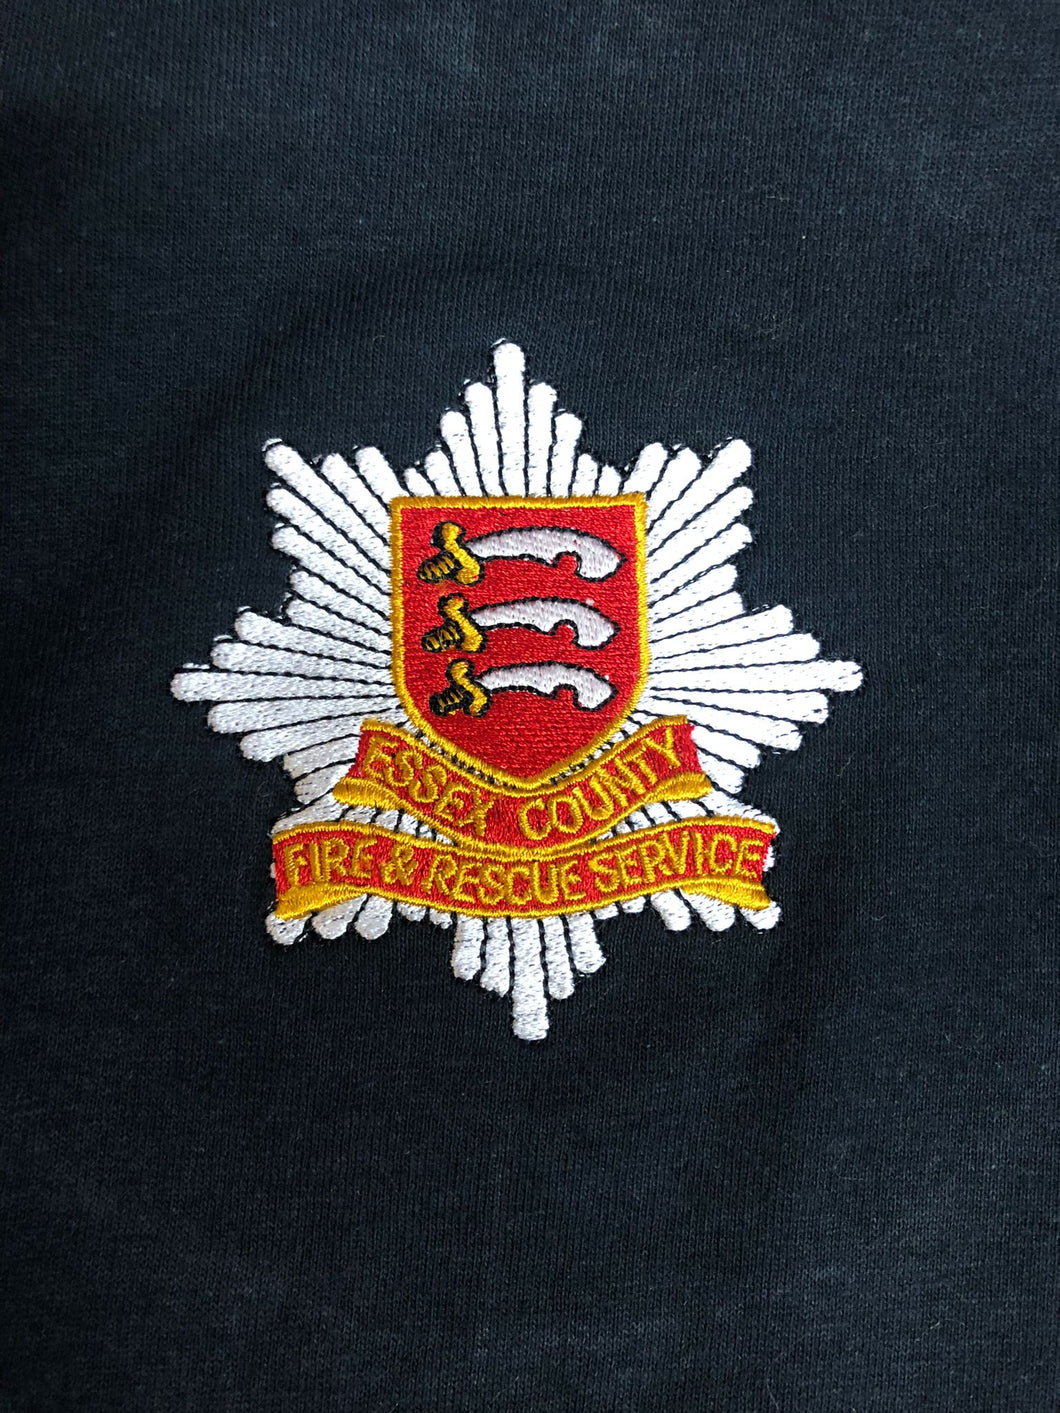 Essex Fire & Rescue Service- Embroidered - Choose your Garment